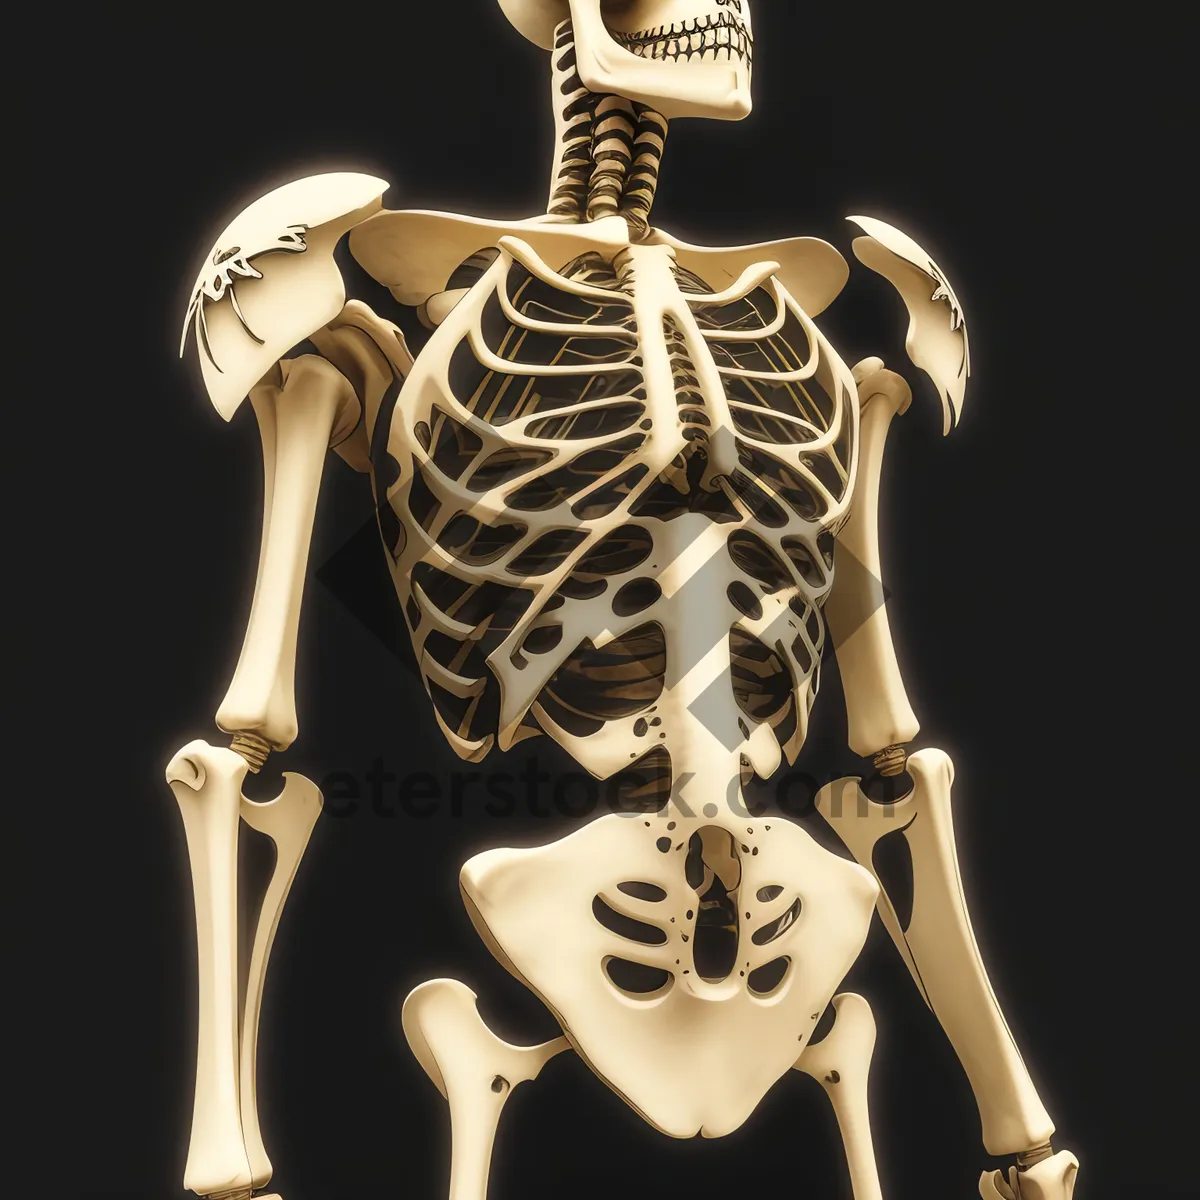 Picture of Human Skeleton X-Ray - Anatomical Graphic for Medical Science